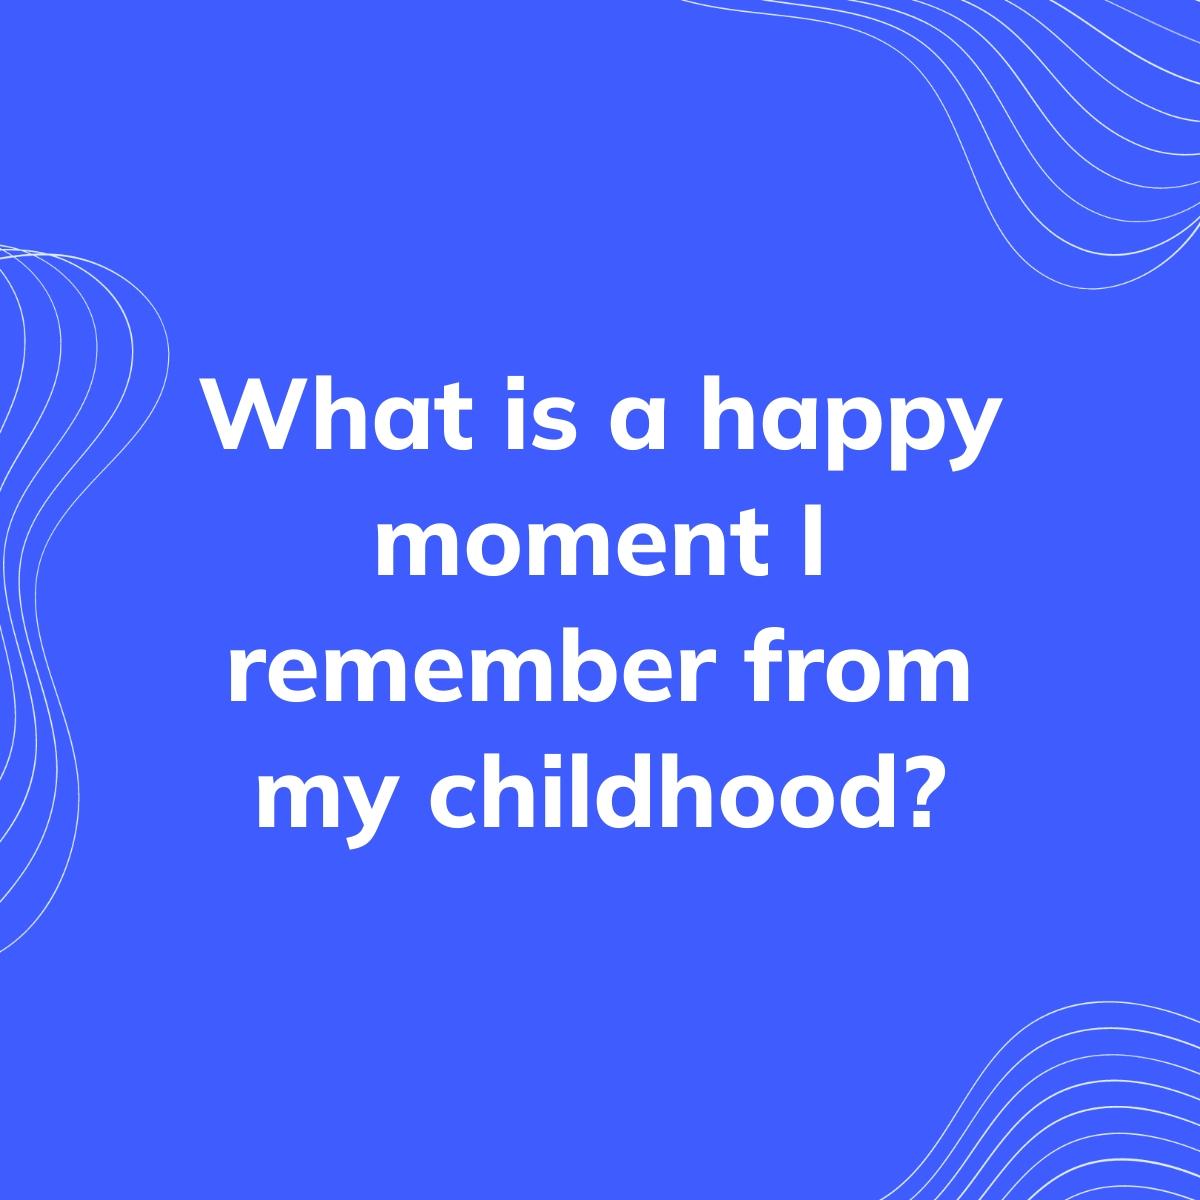 Journal Prompt: What is a happy moment I remember from my childhood?